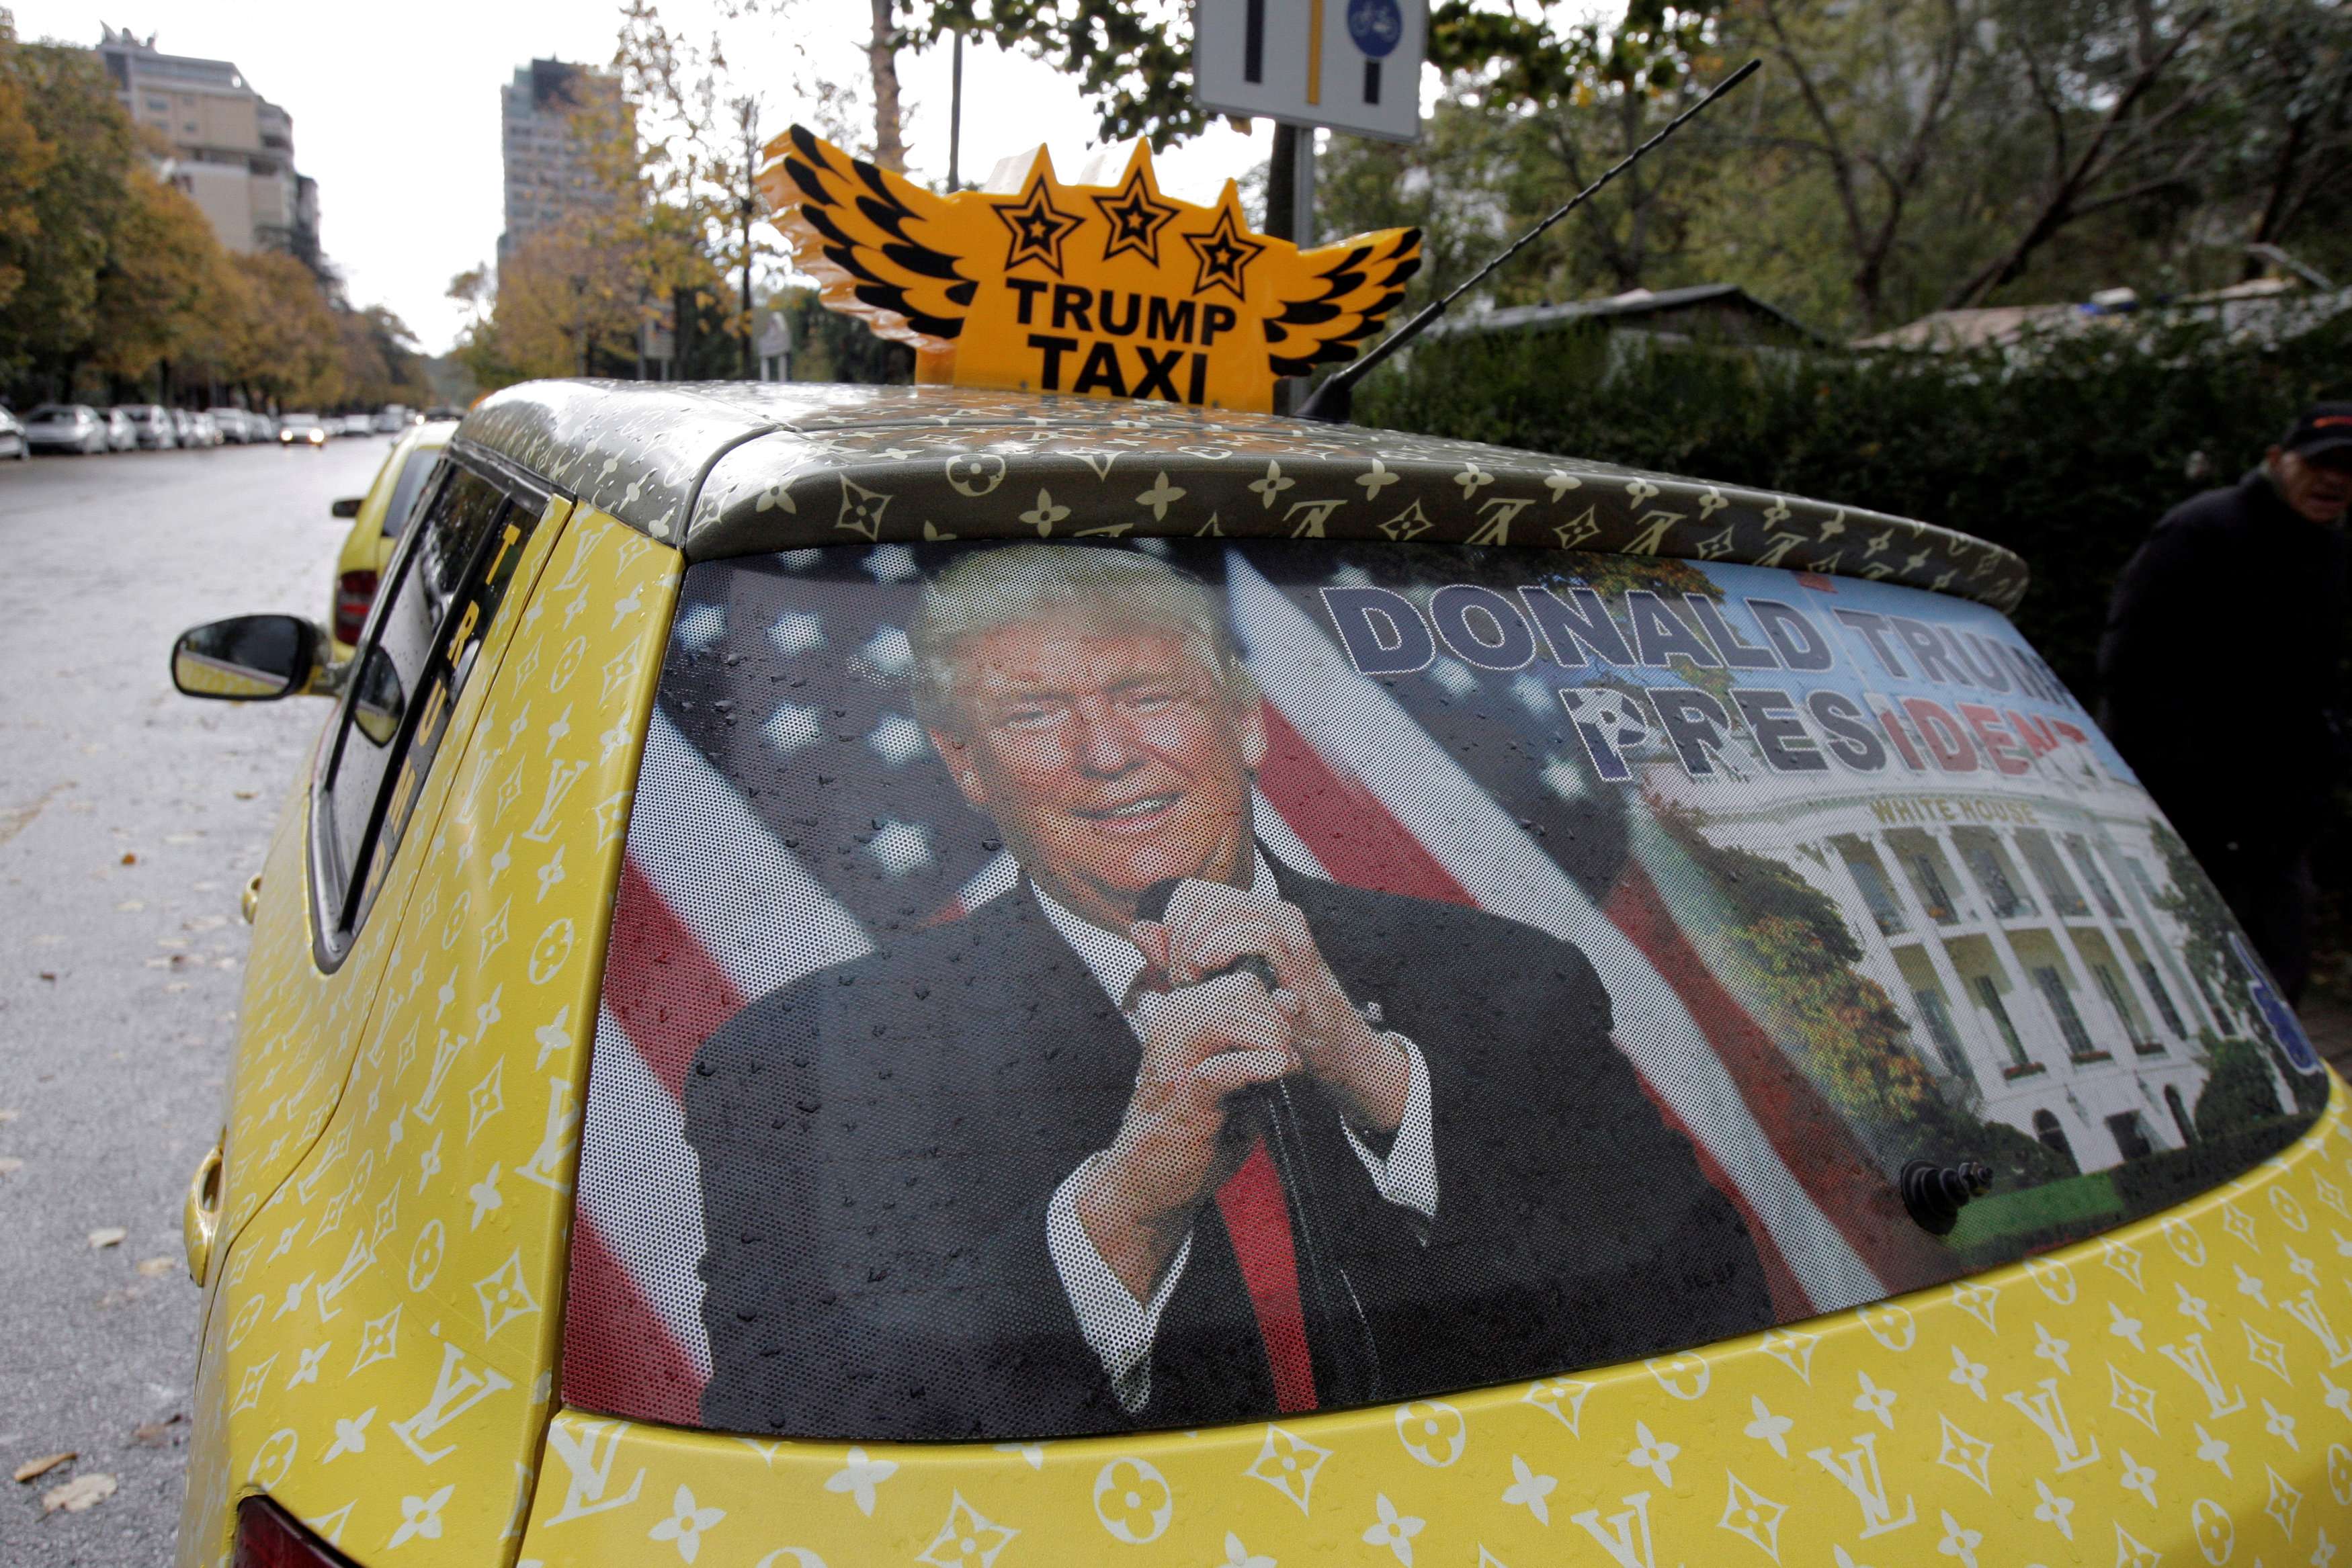 A taxi in Tirana, Albania, is decorated with a picture of Donald Trump to celebrate his victory in the US election. Those who have been accused of elitist arrogance need to at least try to see things from their accusers’ point of view. Photo: Reuters